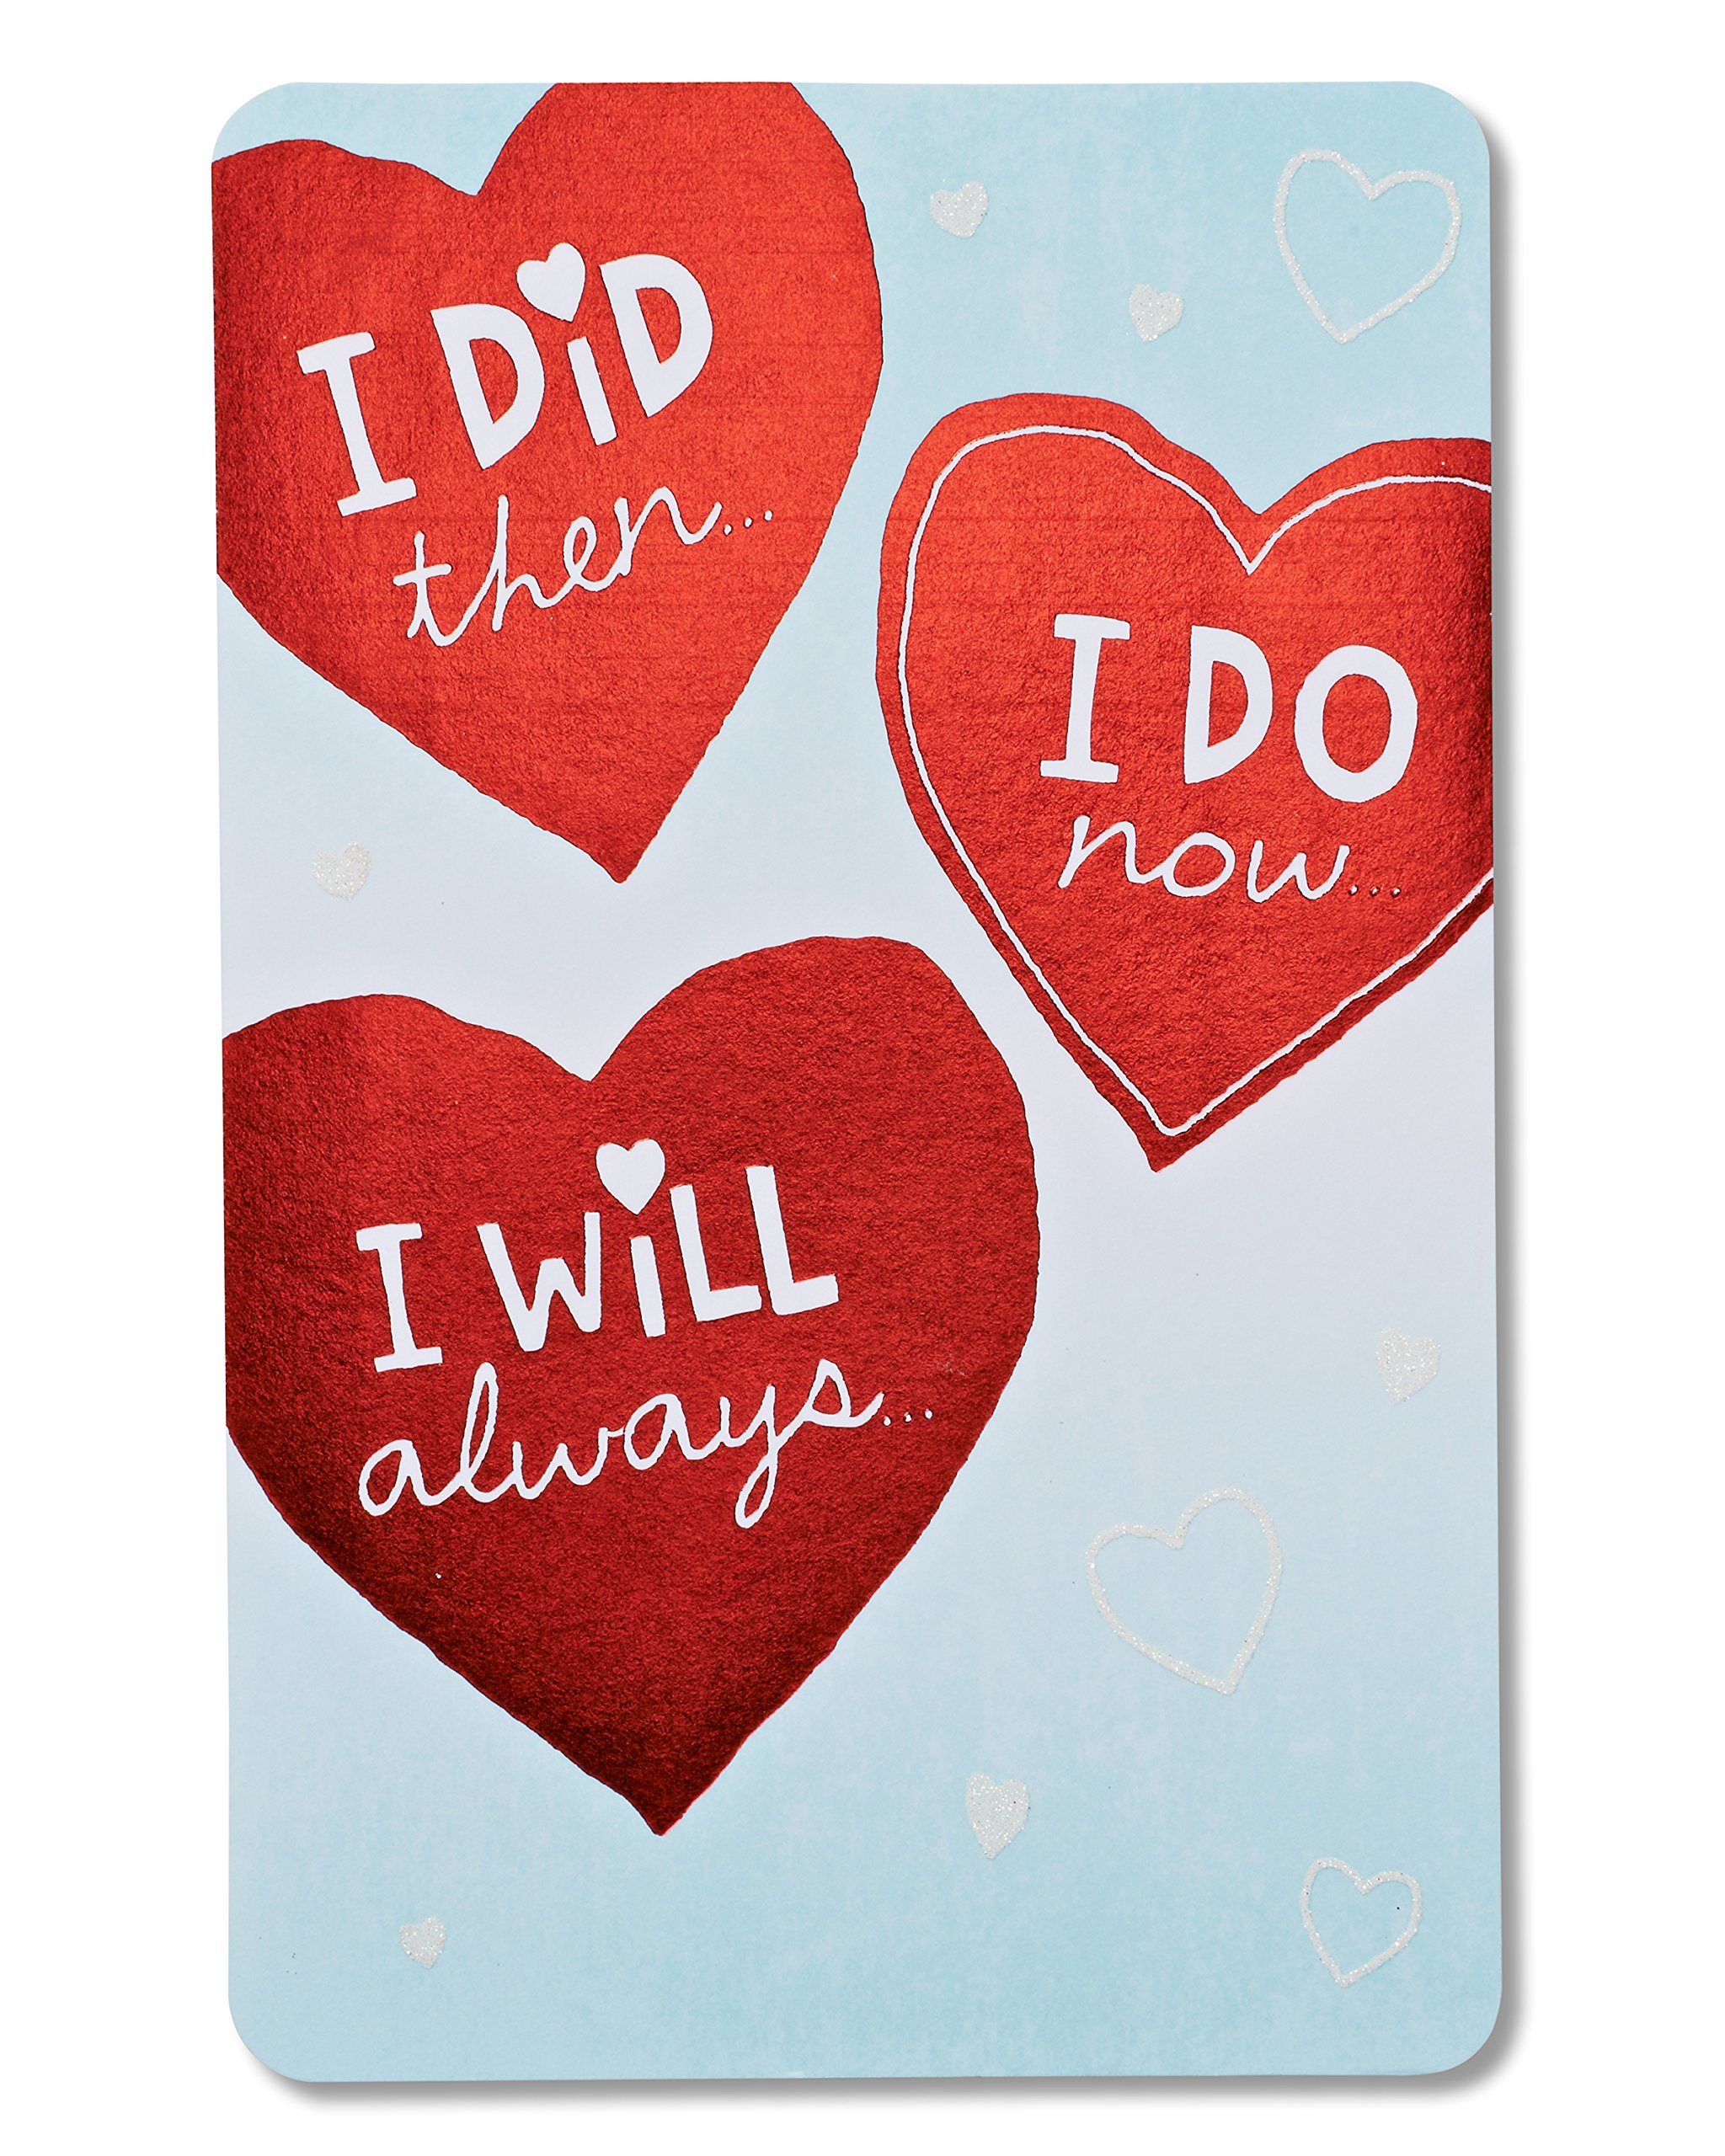 American Greetings Romantic Anniversary Card (Love You With All My Heart)